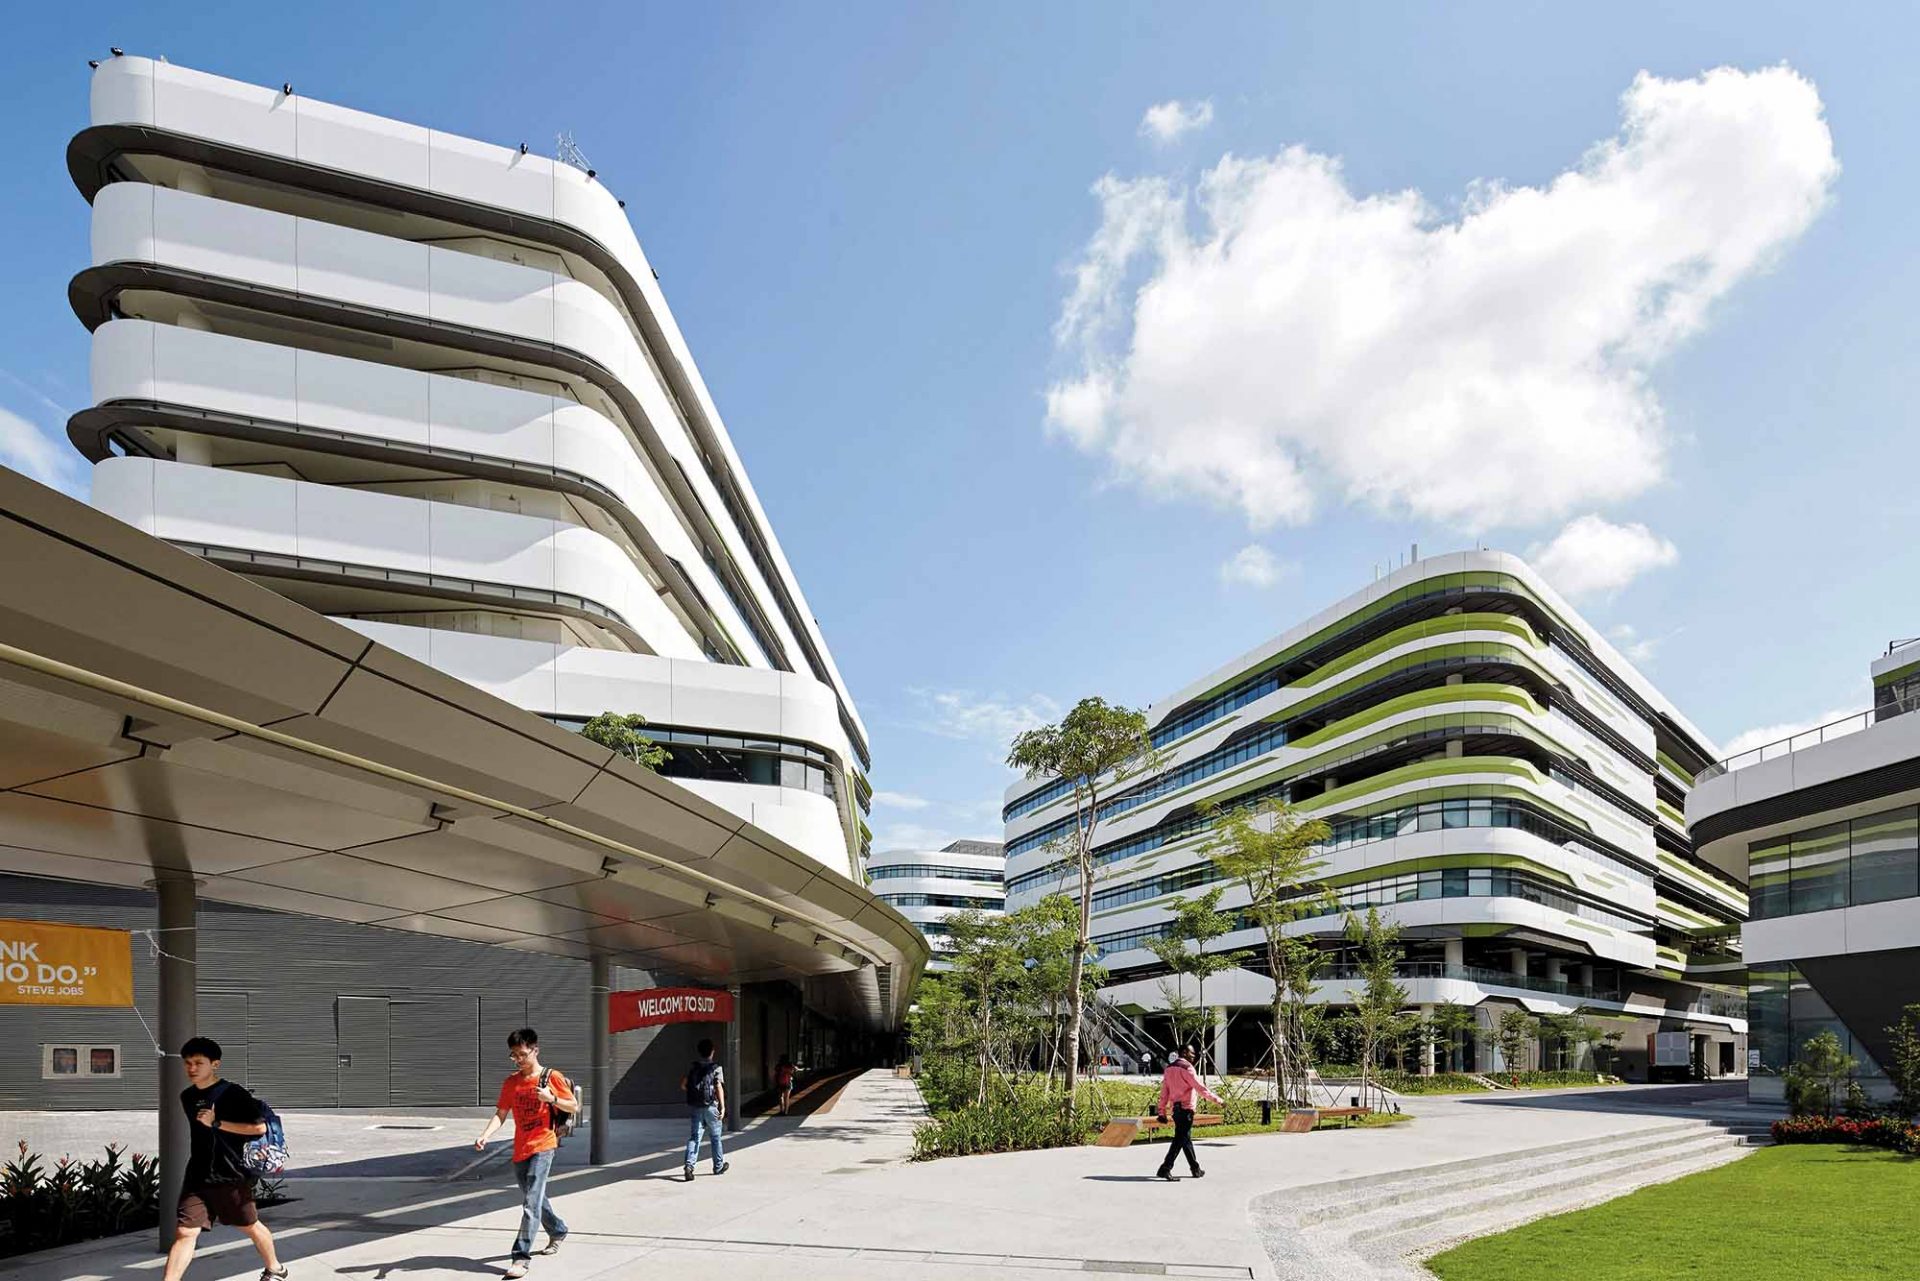 Approach Towards Campus With Landscaping. Singapore University Of Technology And Design, Singapore, Singapore. Architect: UNStudio, 2015.